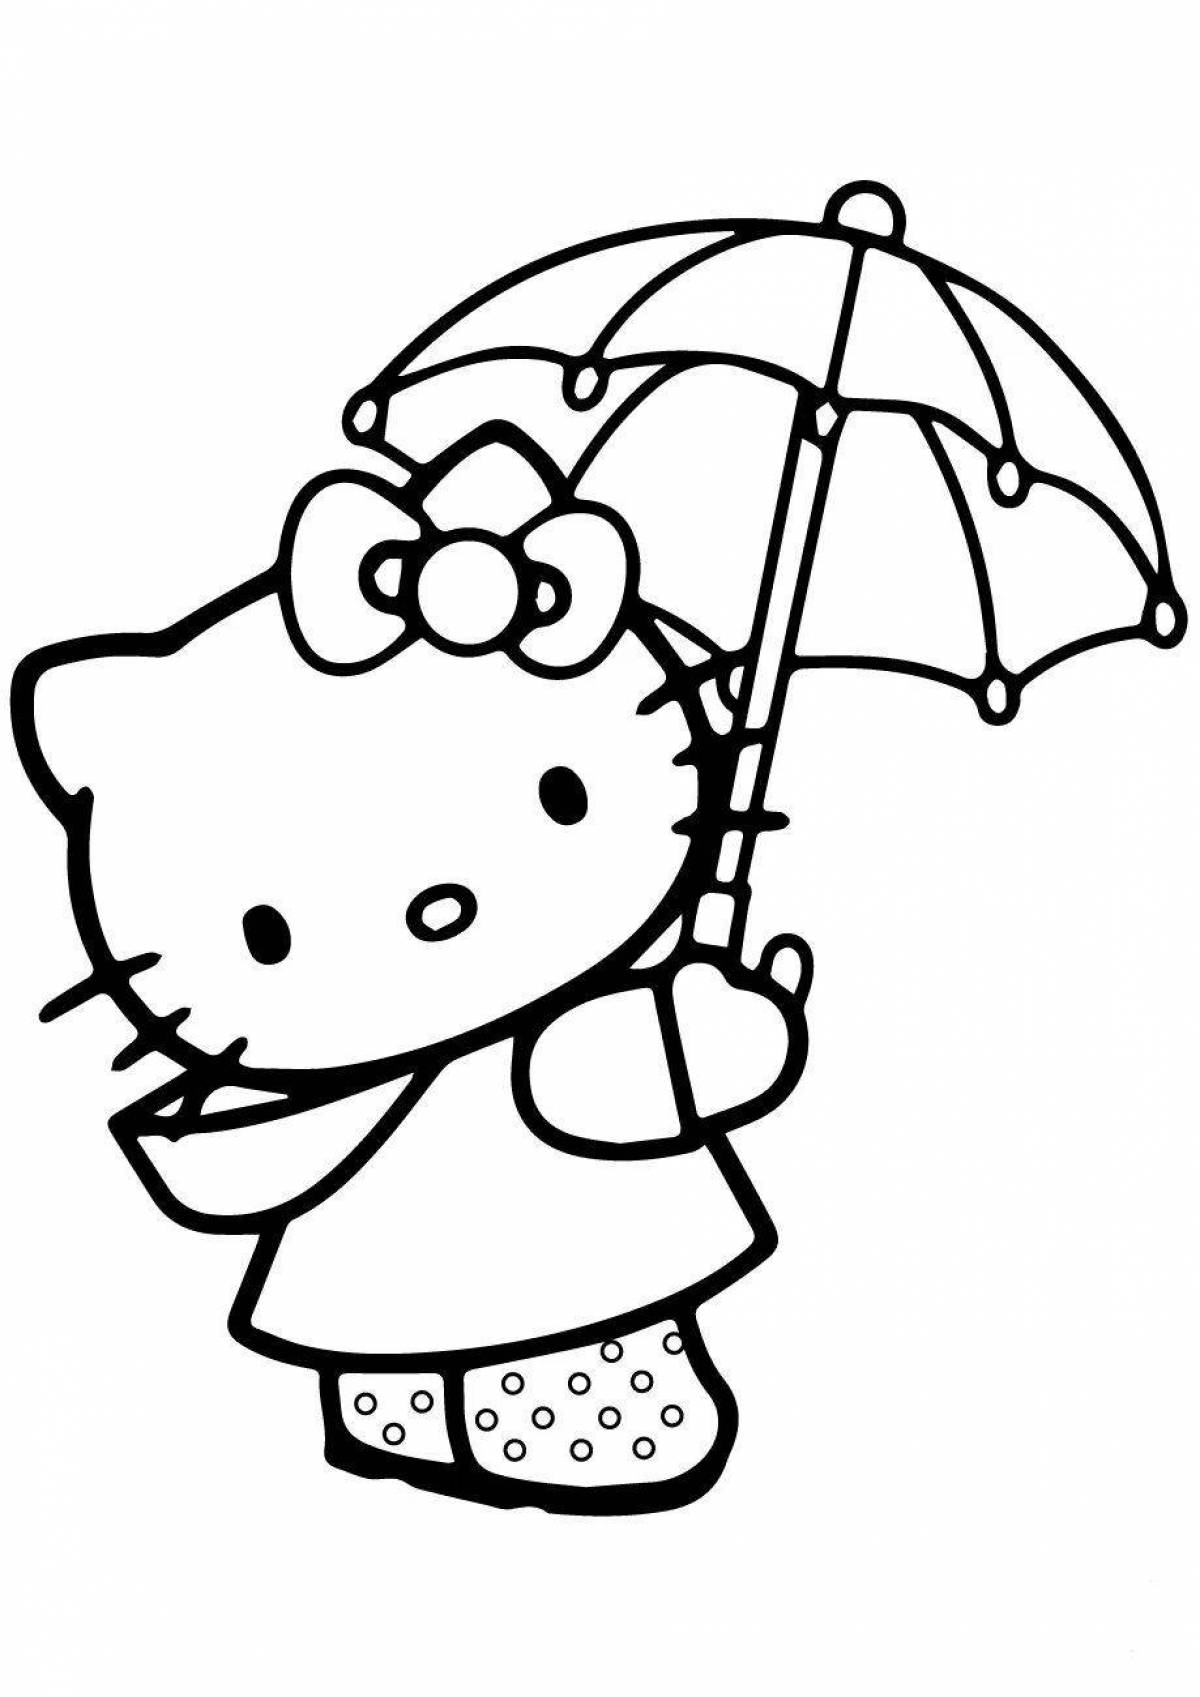 Snuggly coloring page kitty for girls